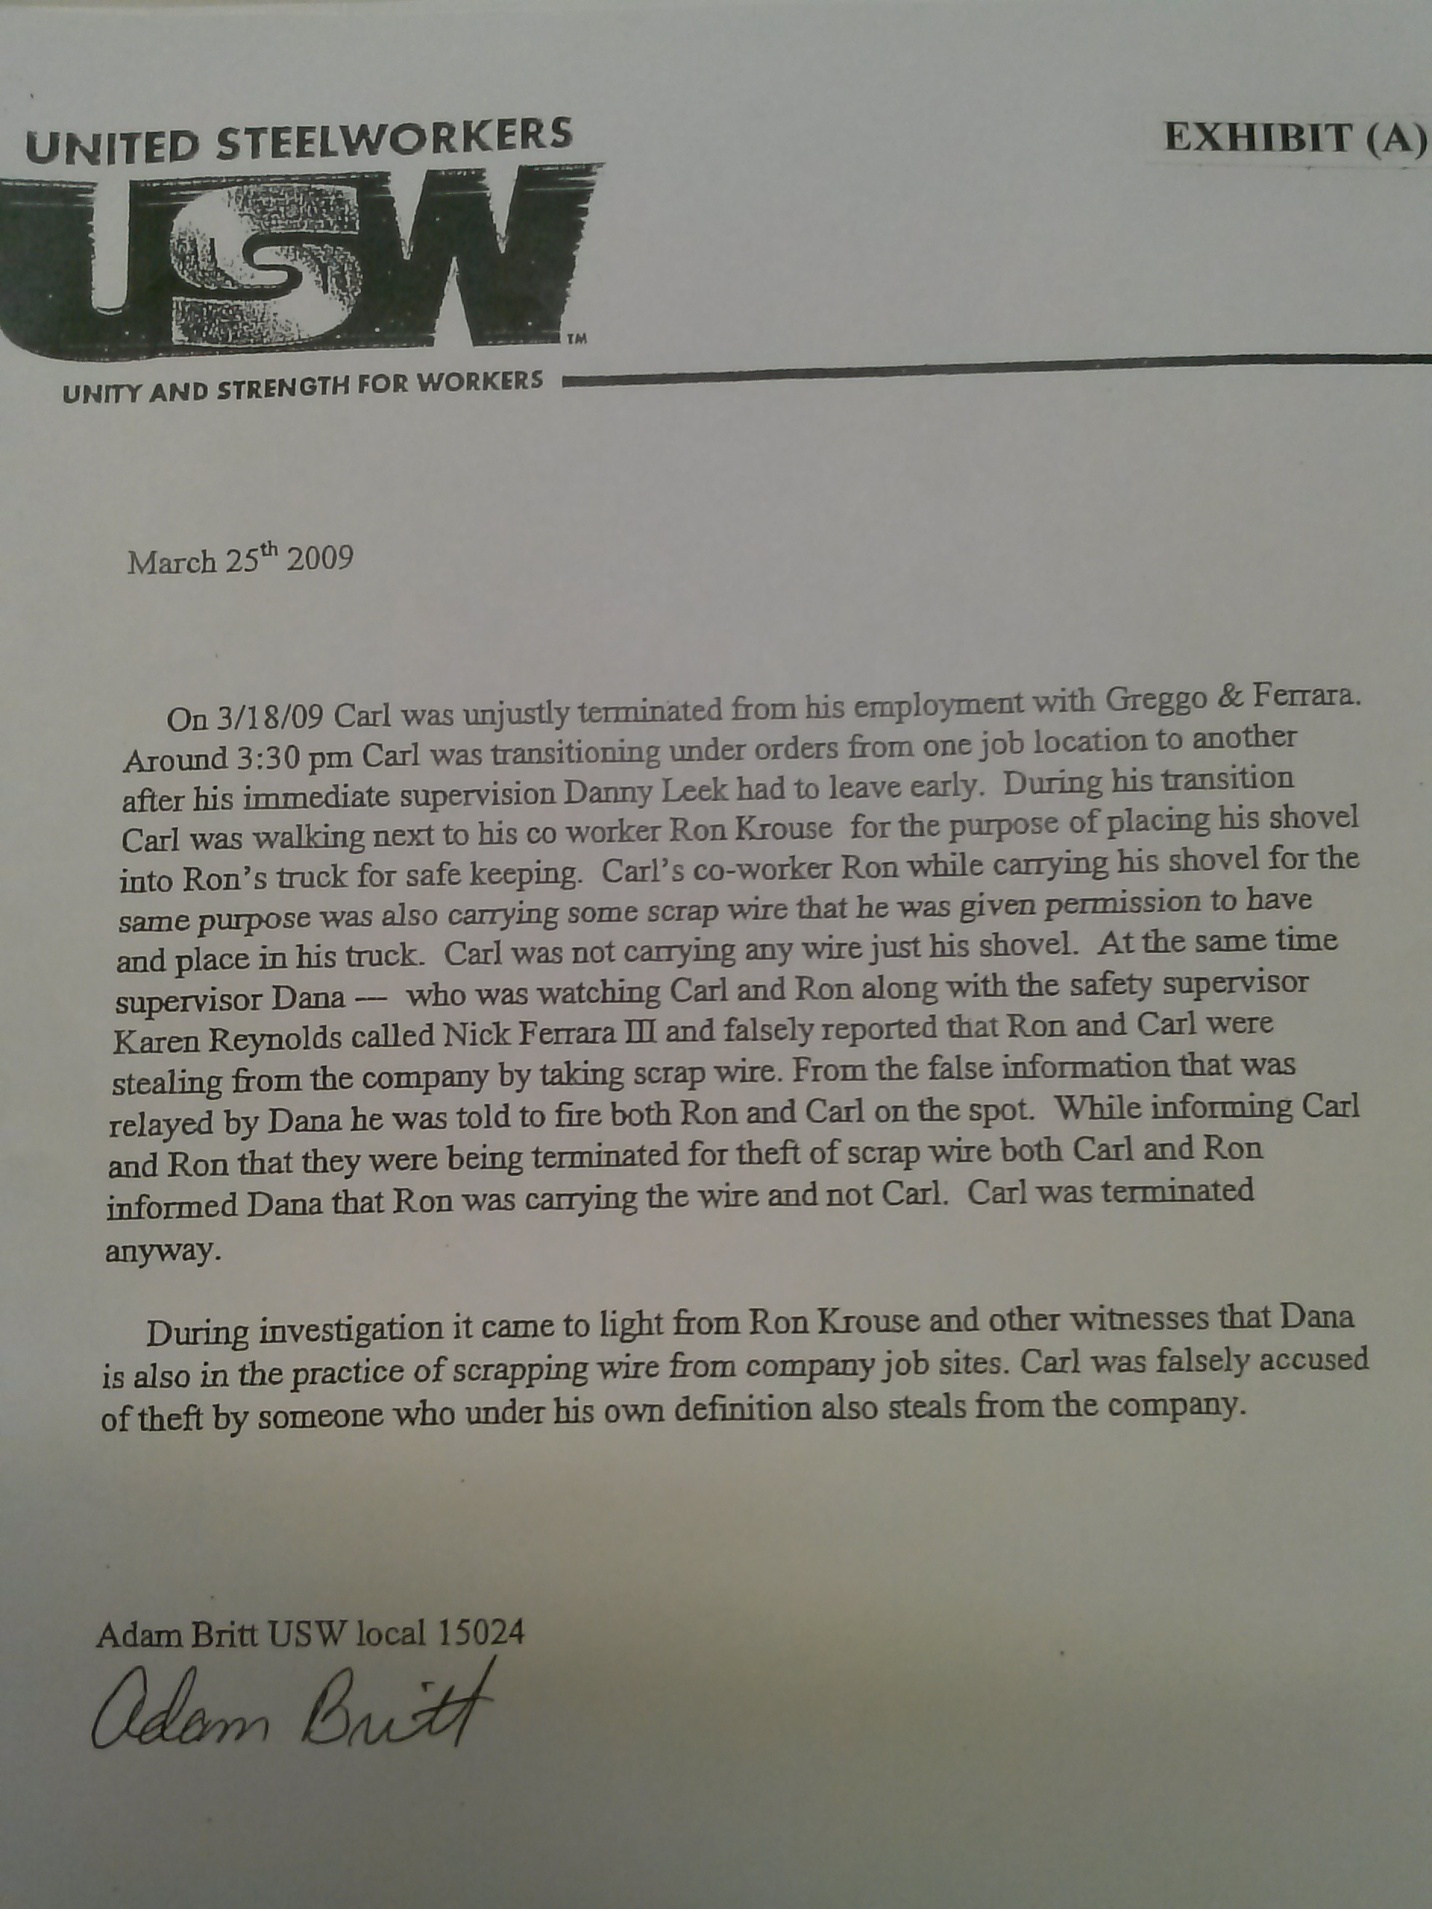 United Steel Works Rep. had written statement of guilty co-workers admission  that Hooten had nothing to do with stilling of Greggo and Ferrara scrap wire.